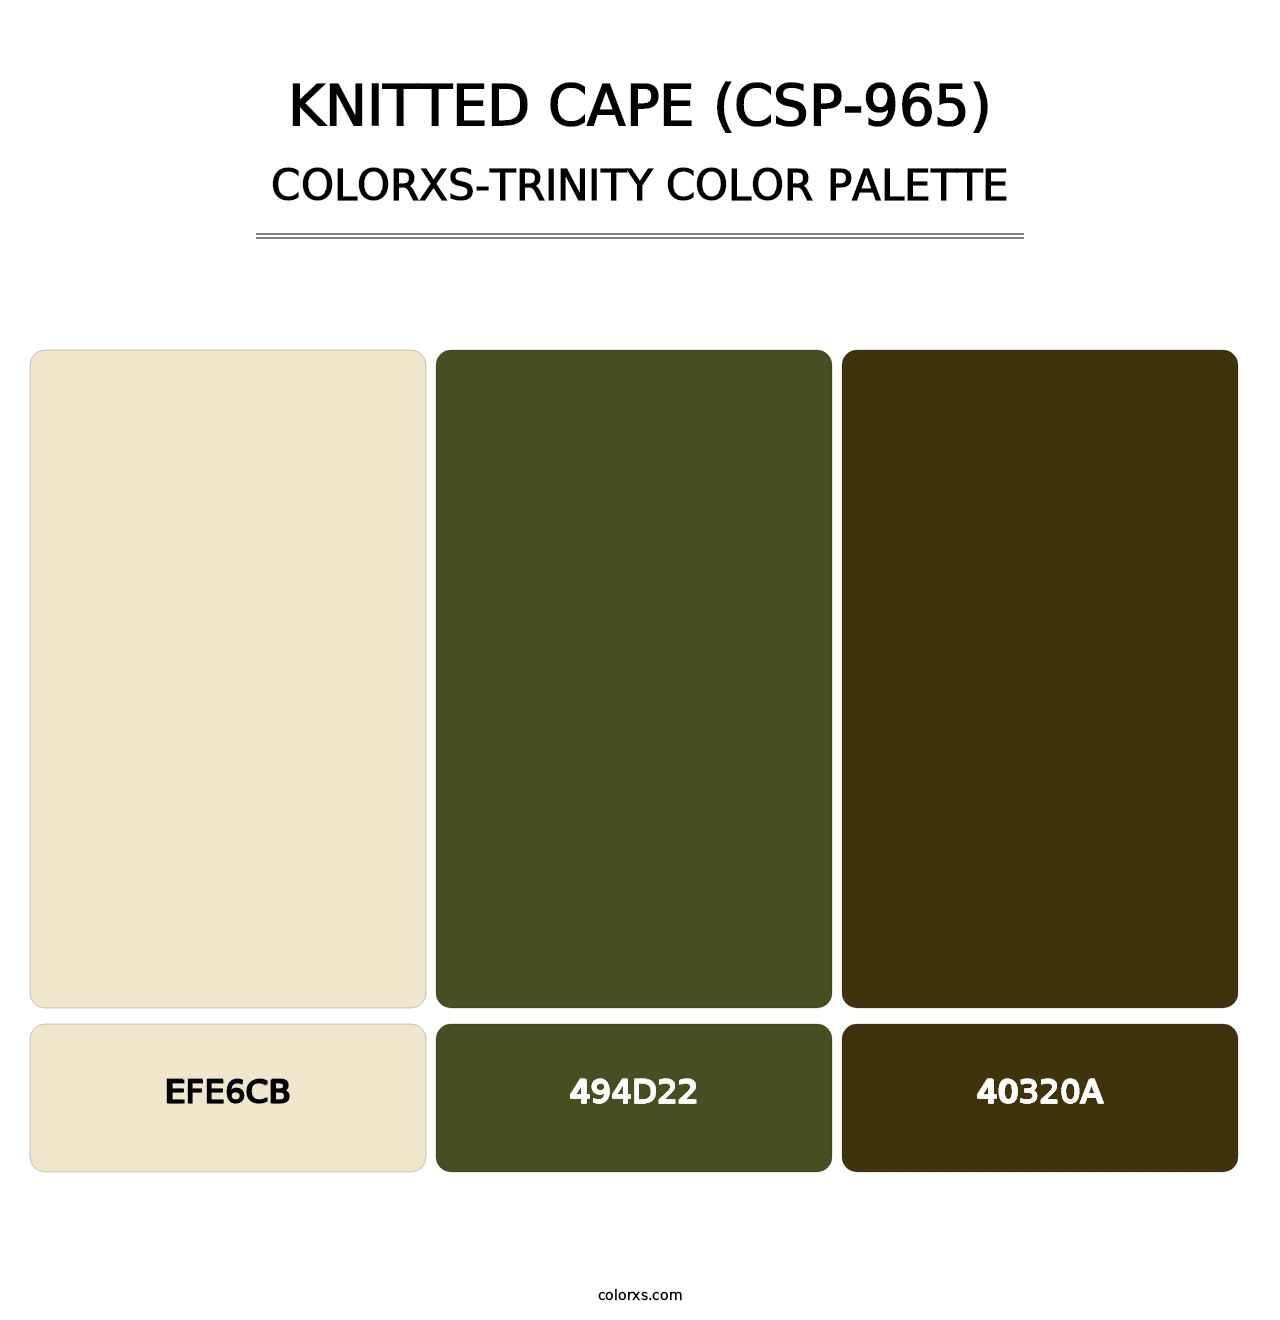 Knitted Cape (CSP-965) - Colorxs Trinity Palette